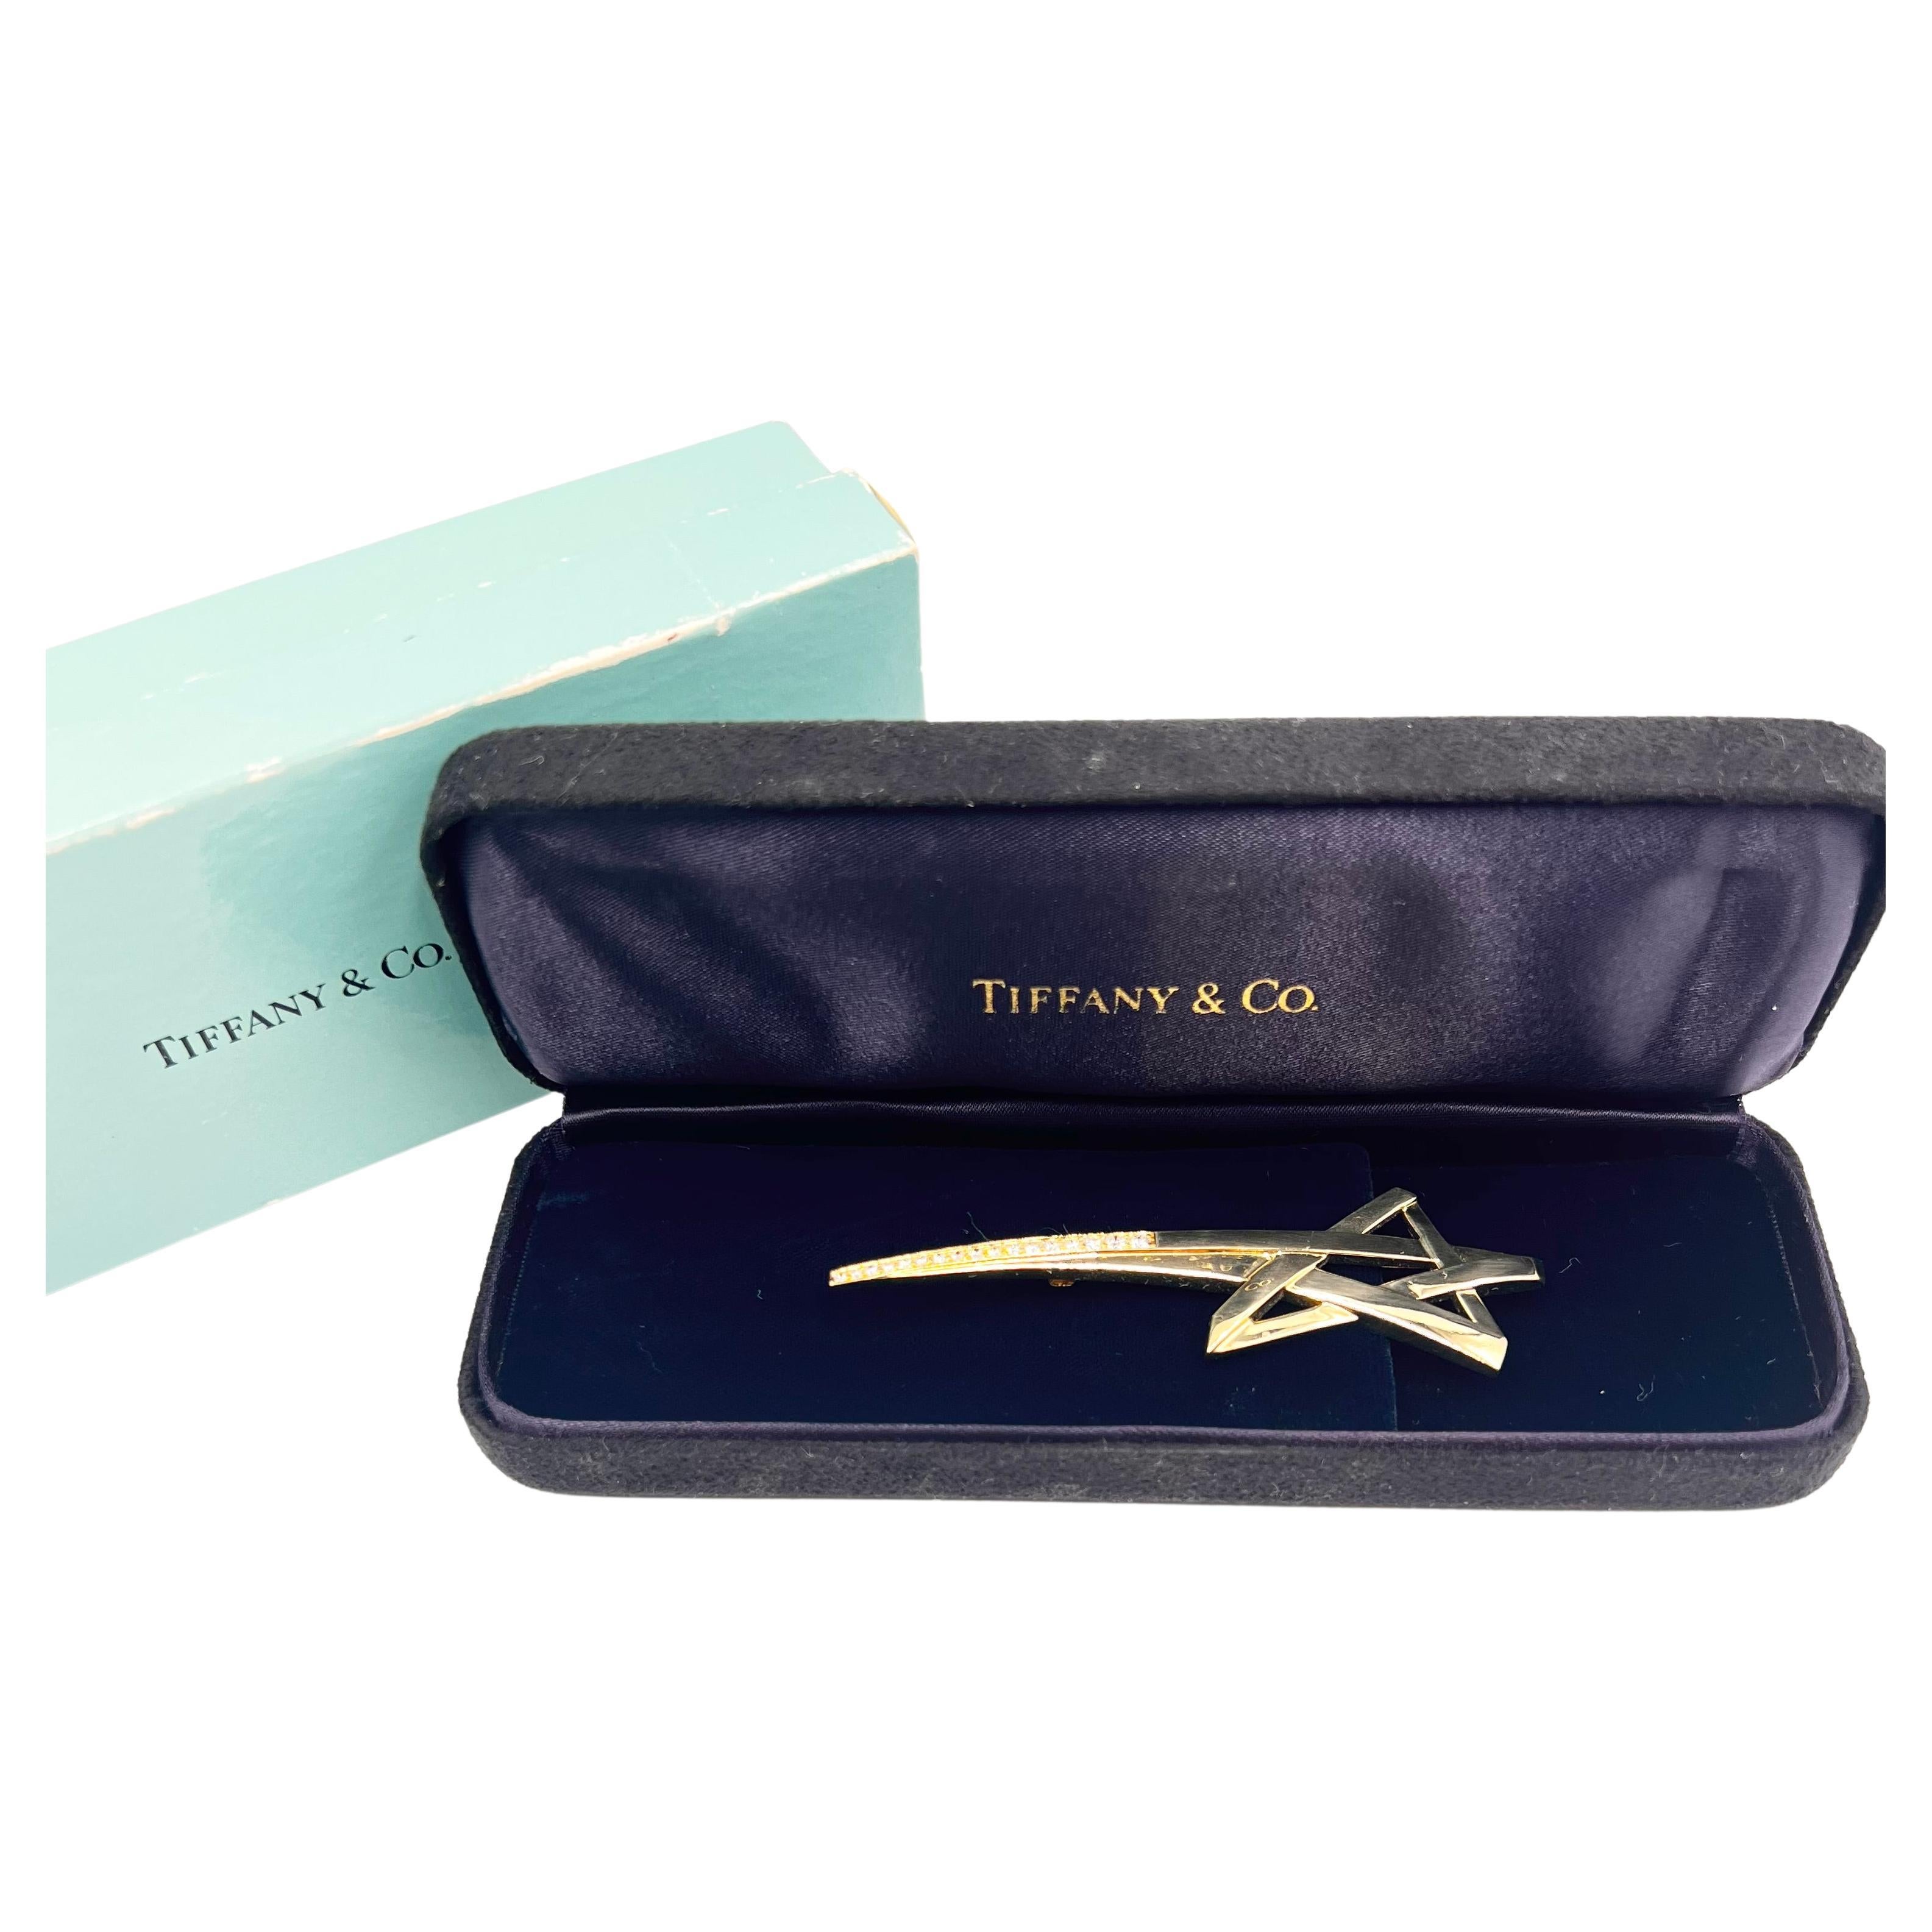 Paloma Picasso's famous shooting star brooch created for Tiffany & Co.  Measuring 3